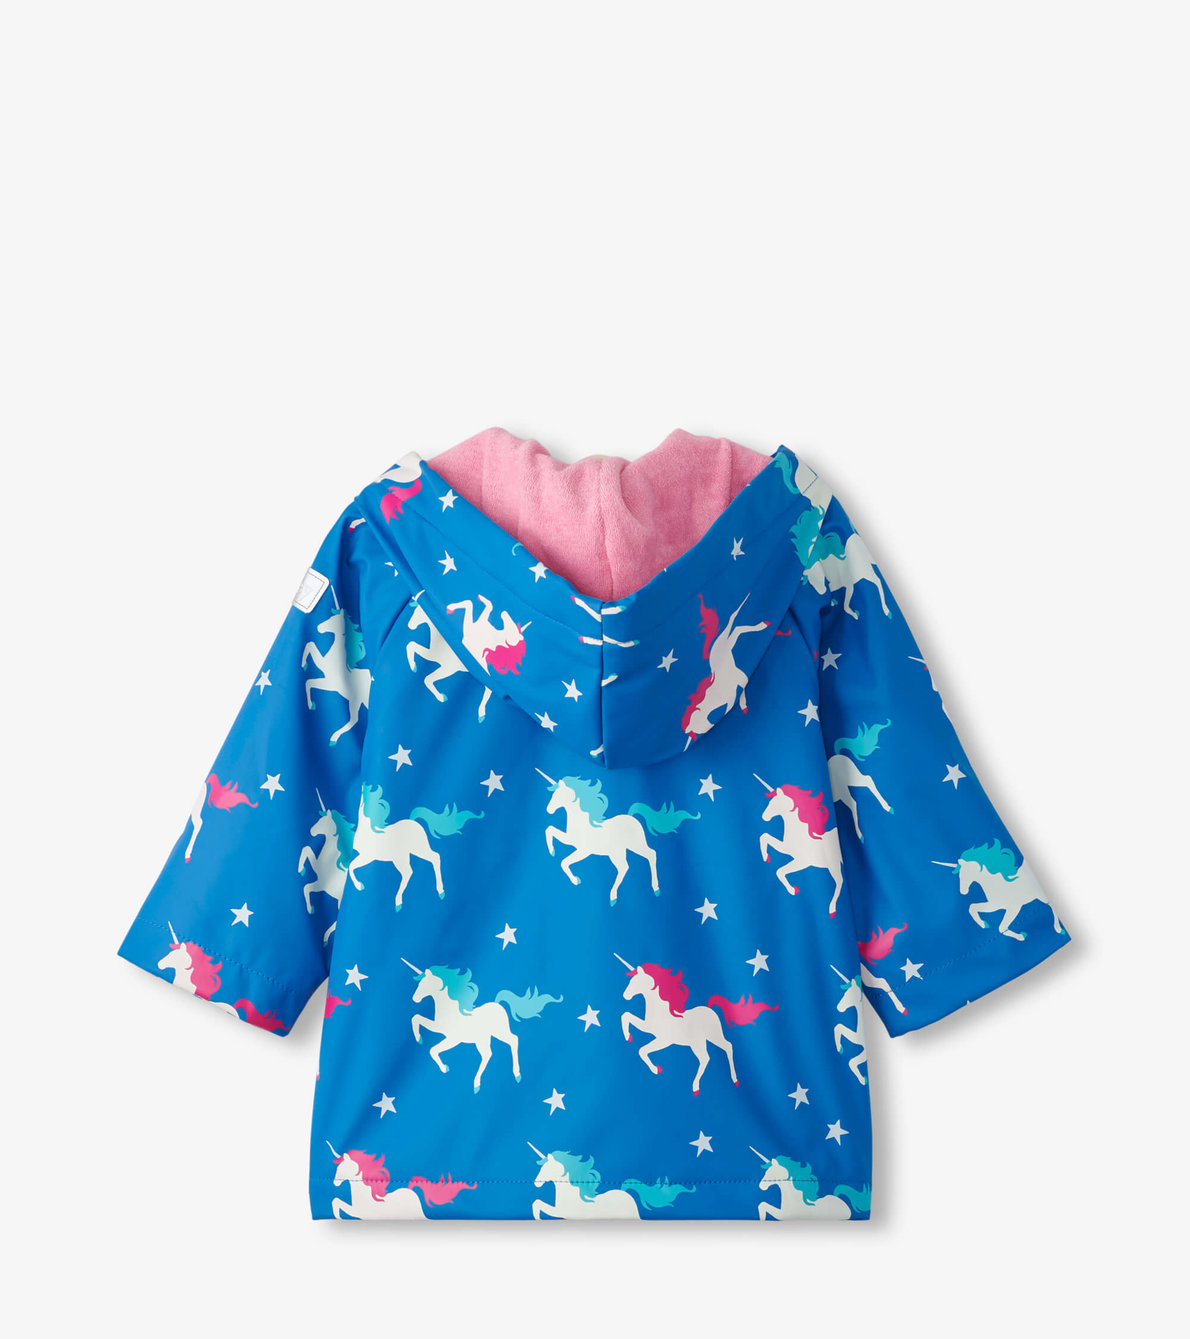 View larger image of Twinkle Unicorns Colour Changing Baby Raincoat